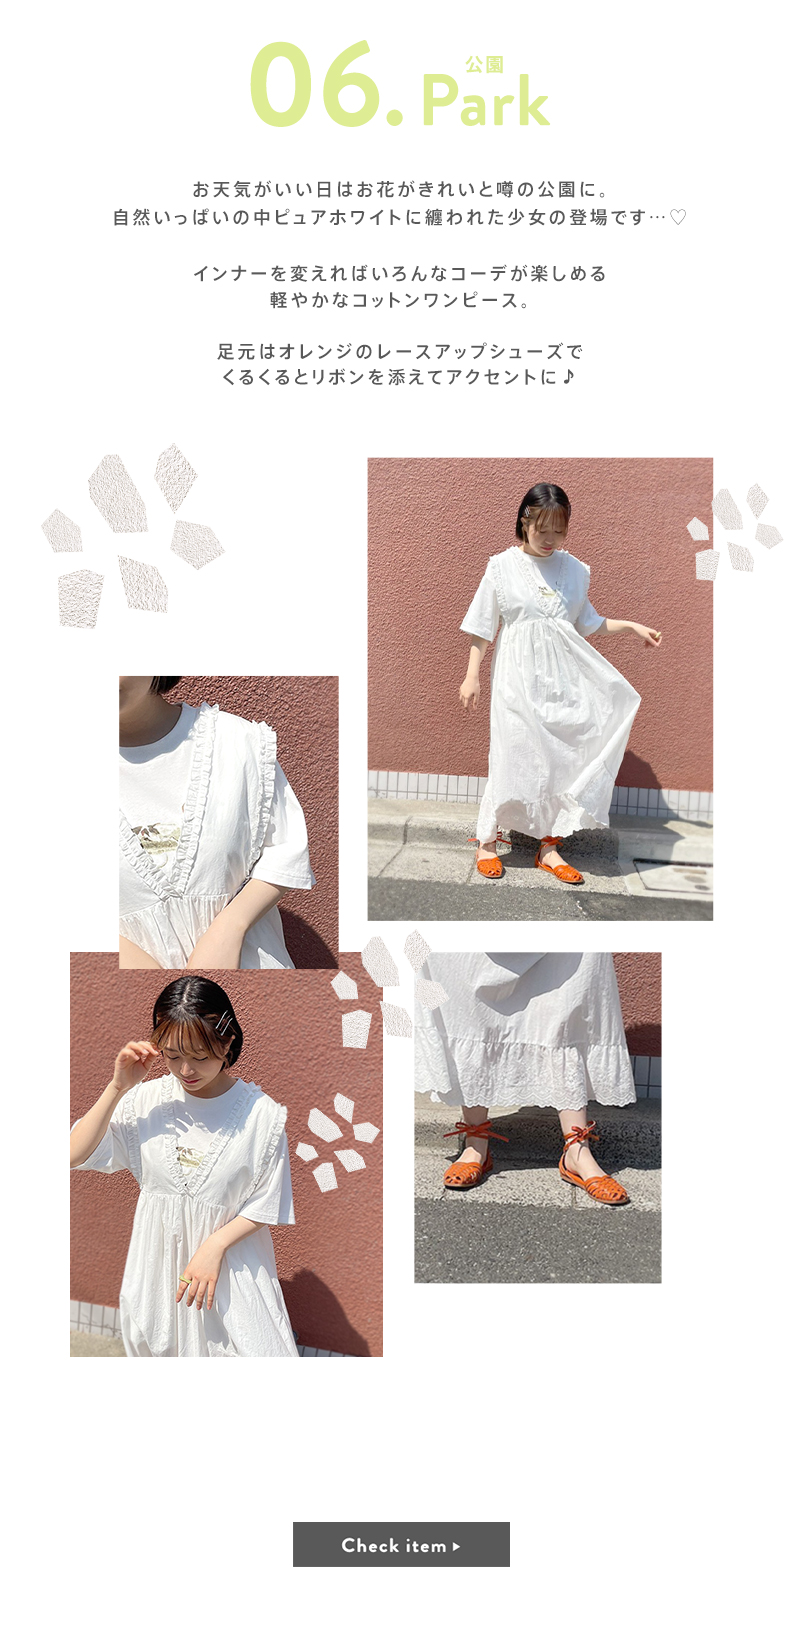 staff recommend coordinate